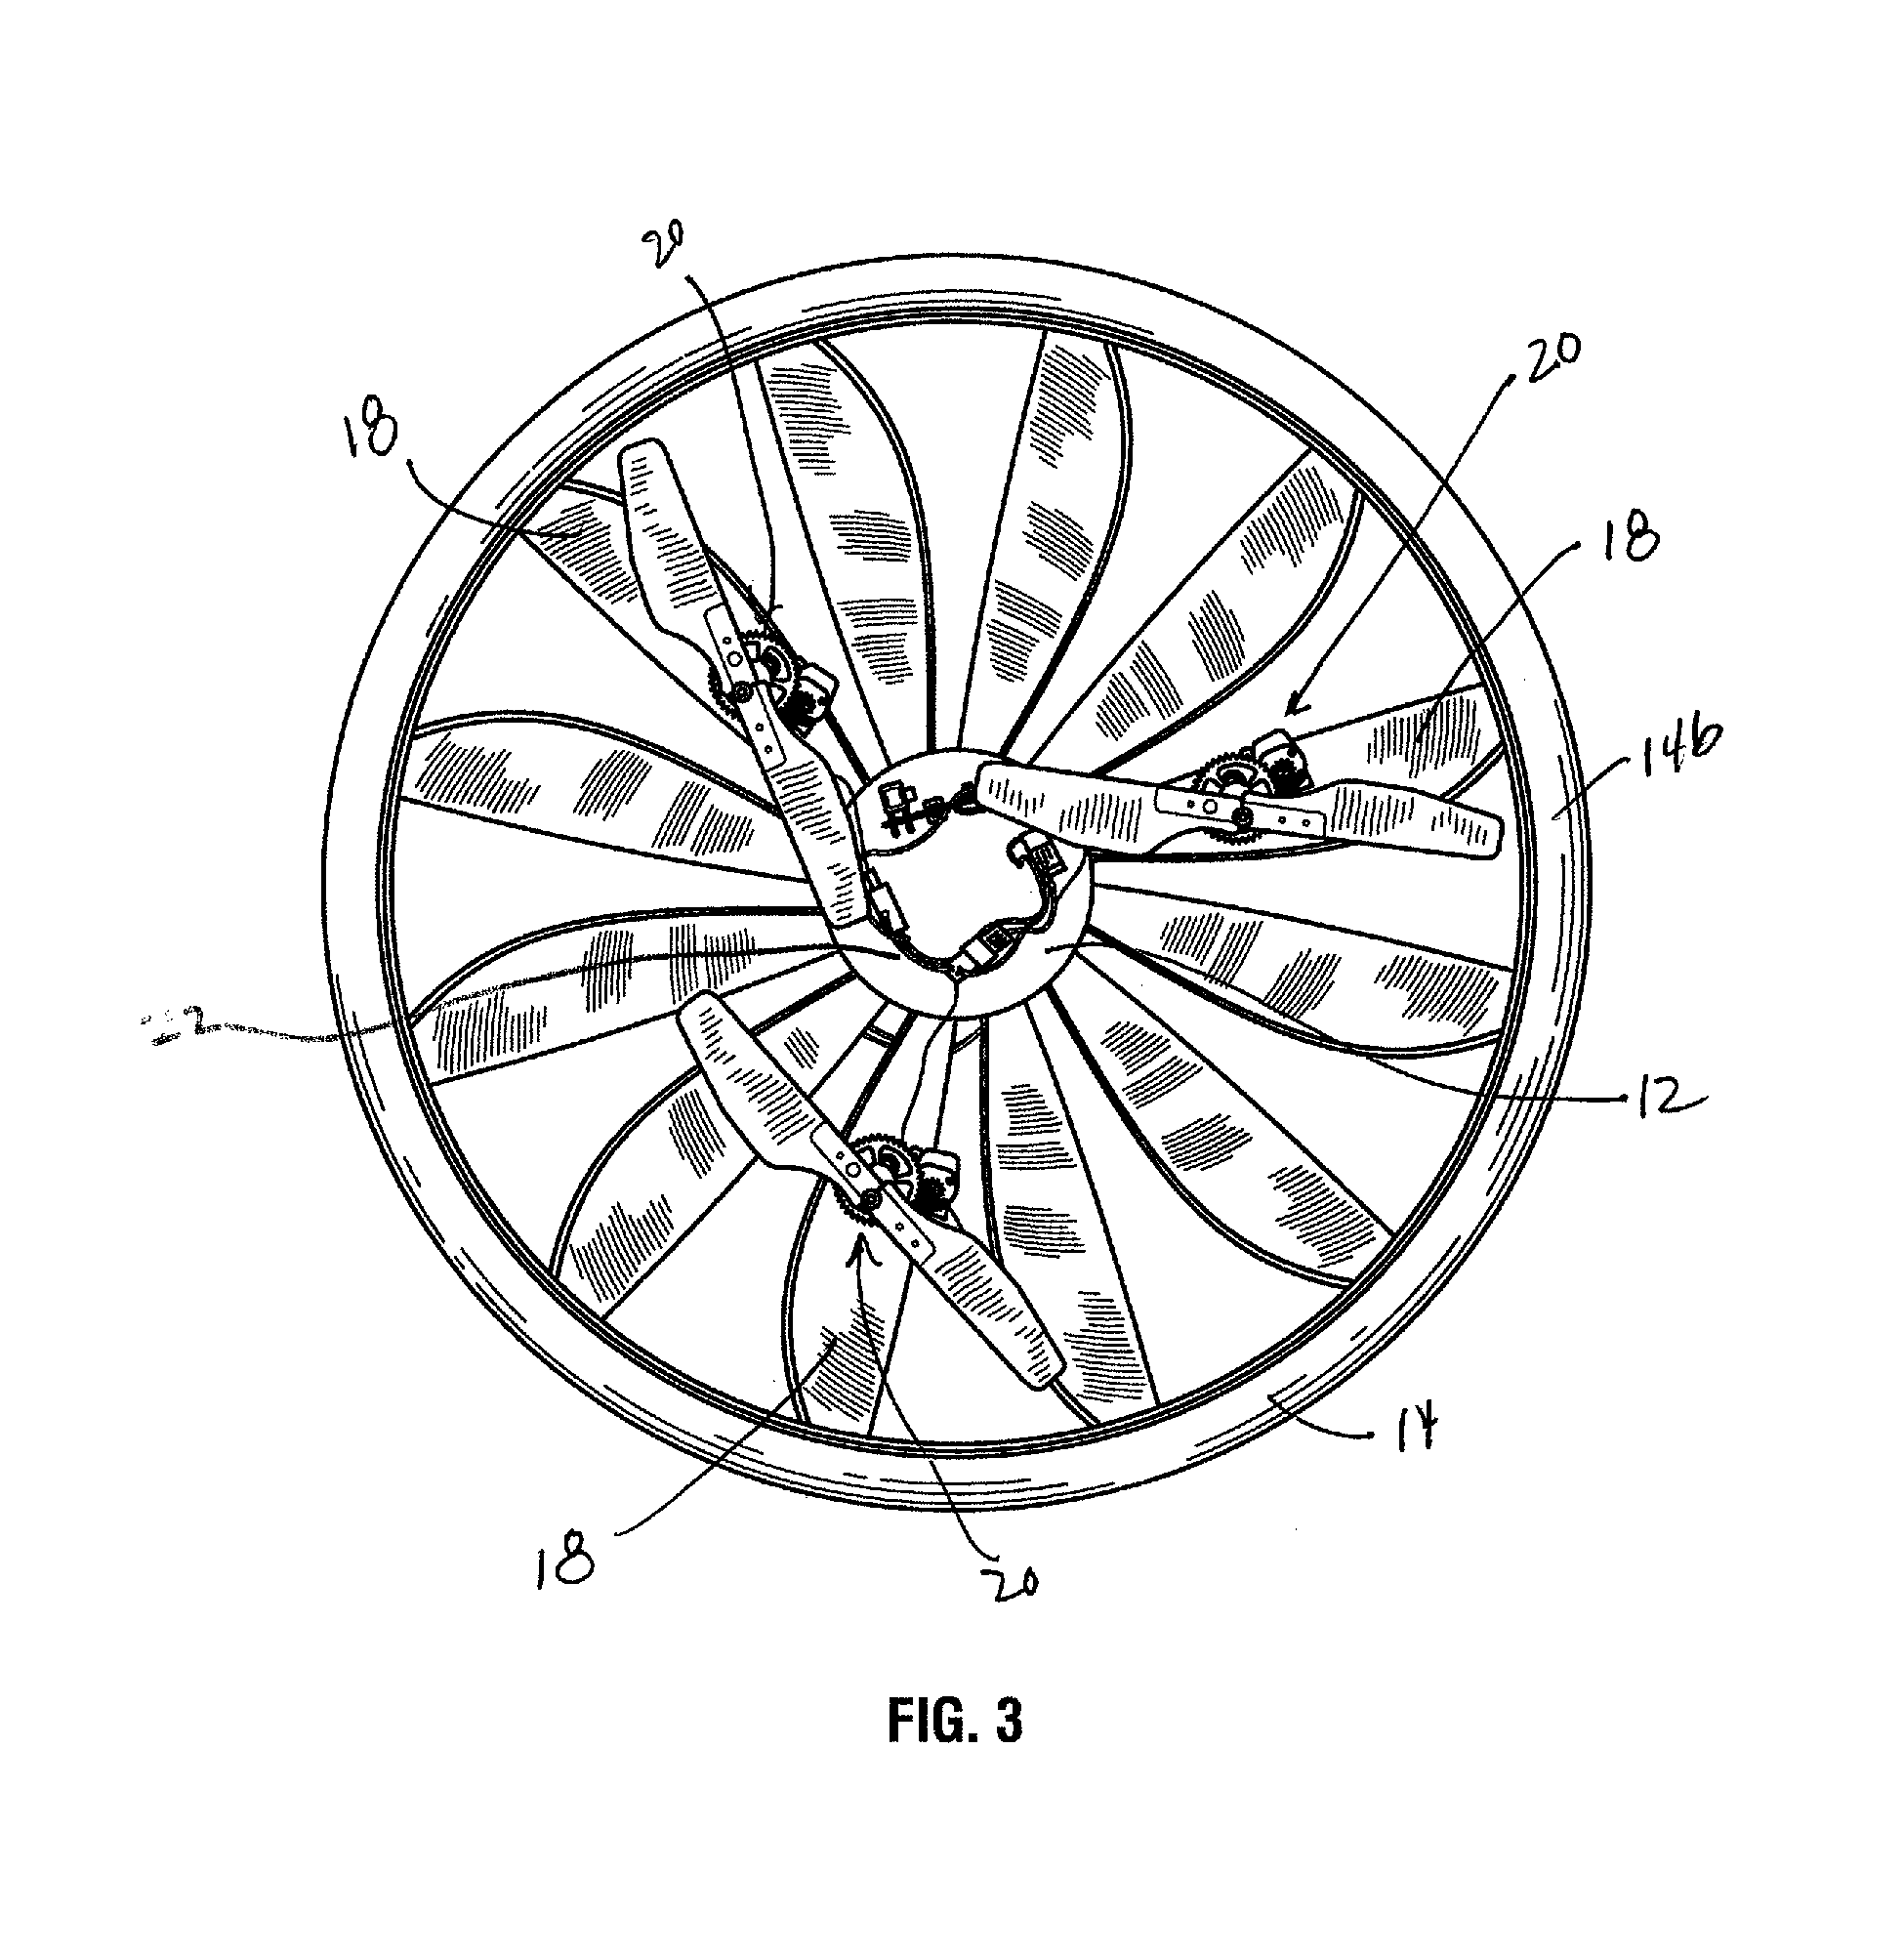 Directionally controllable, self-stabilizing, rotating flying vehicle